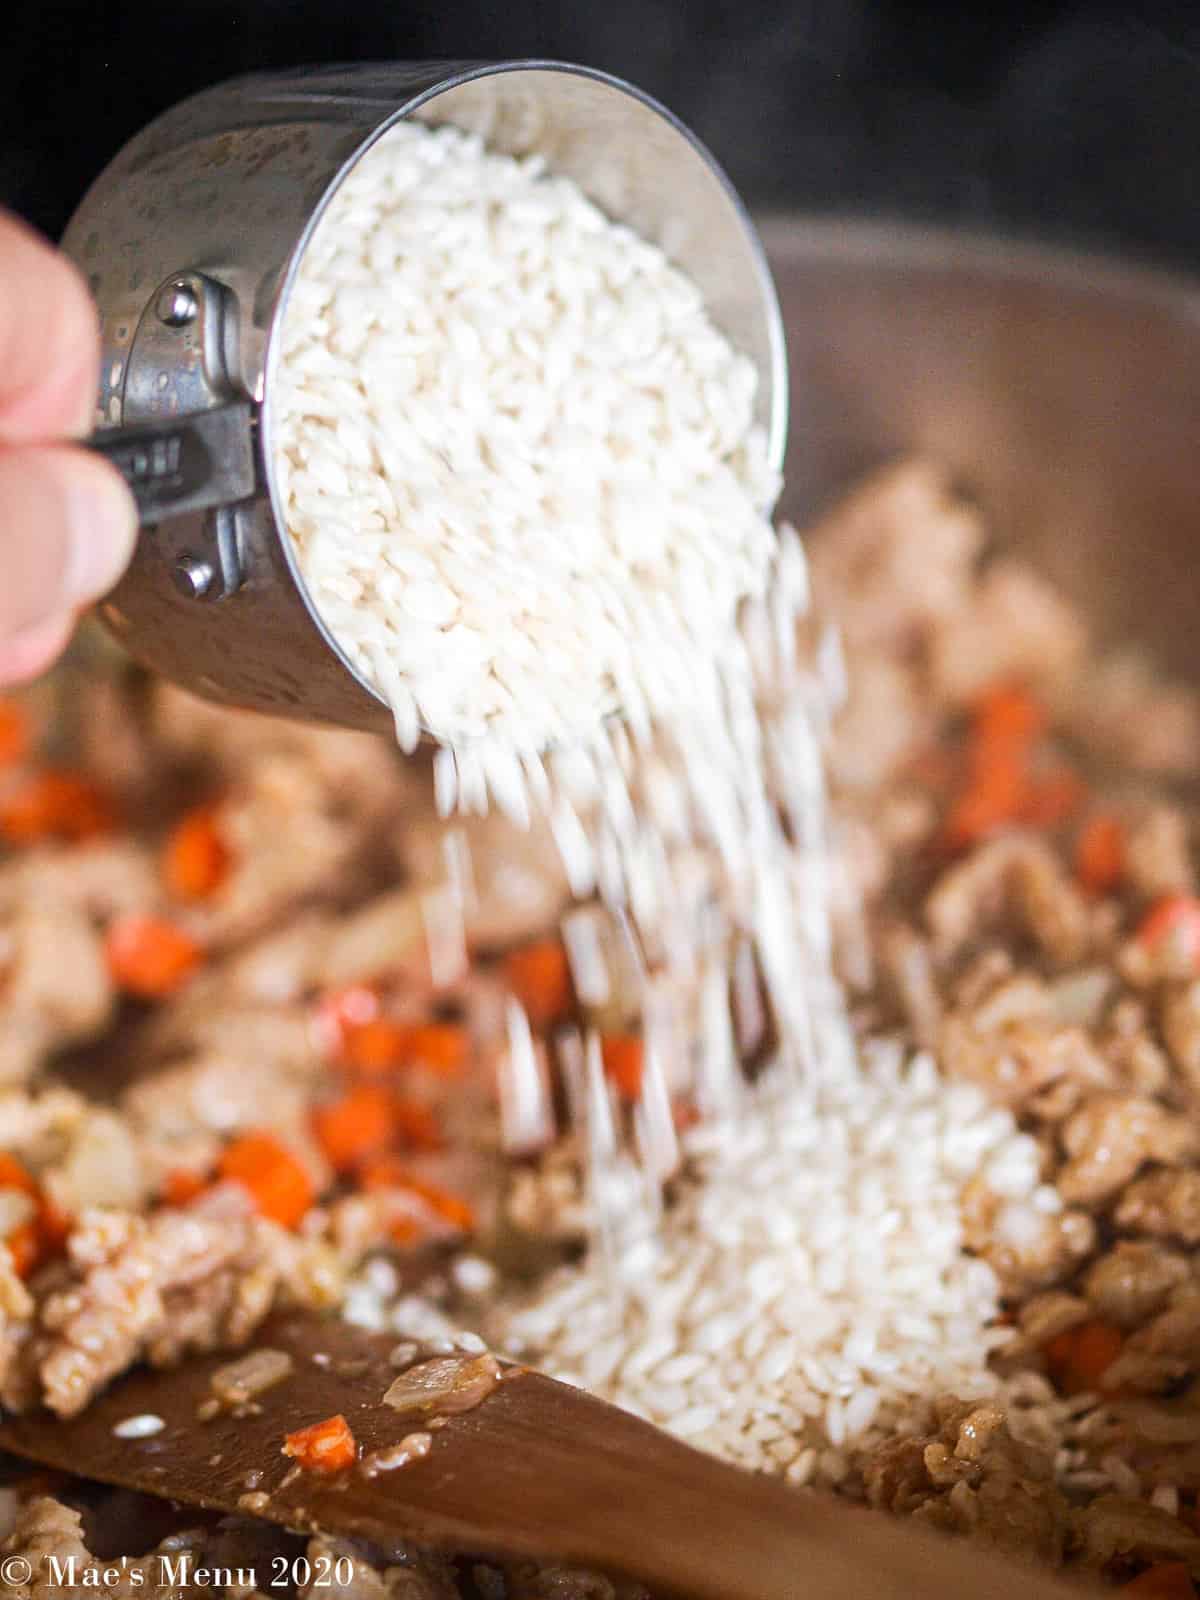 Pouring a cup of arborio rice into the saute pan